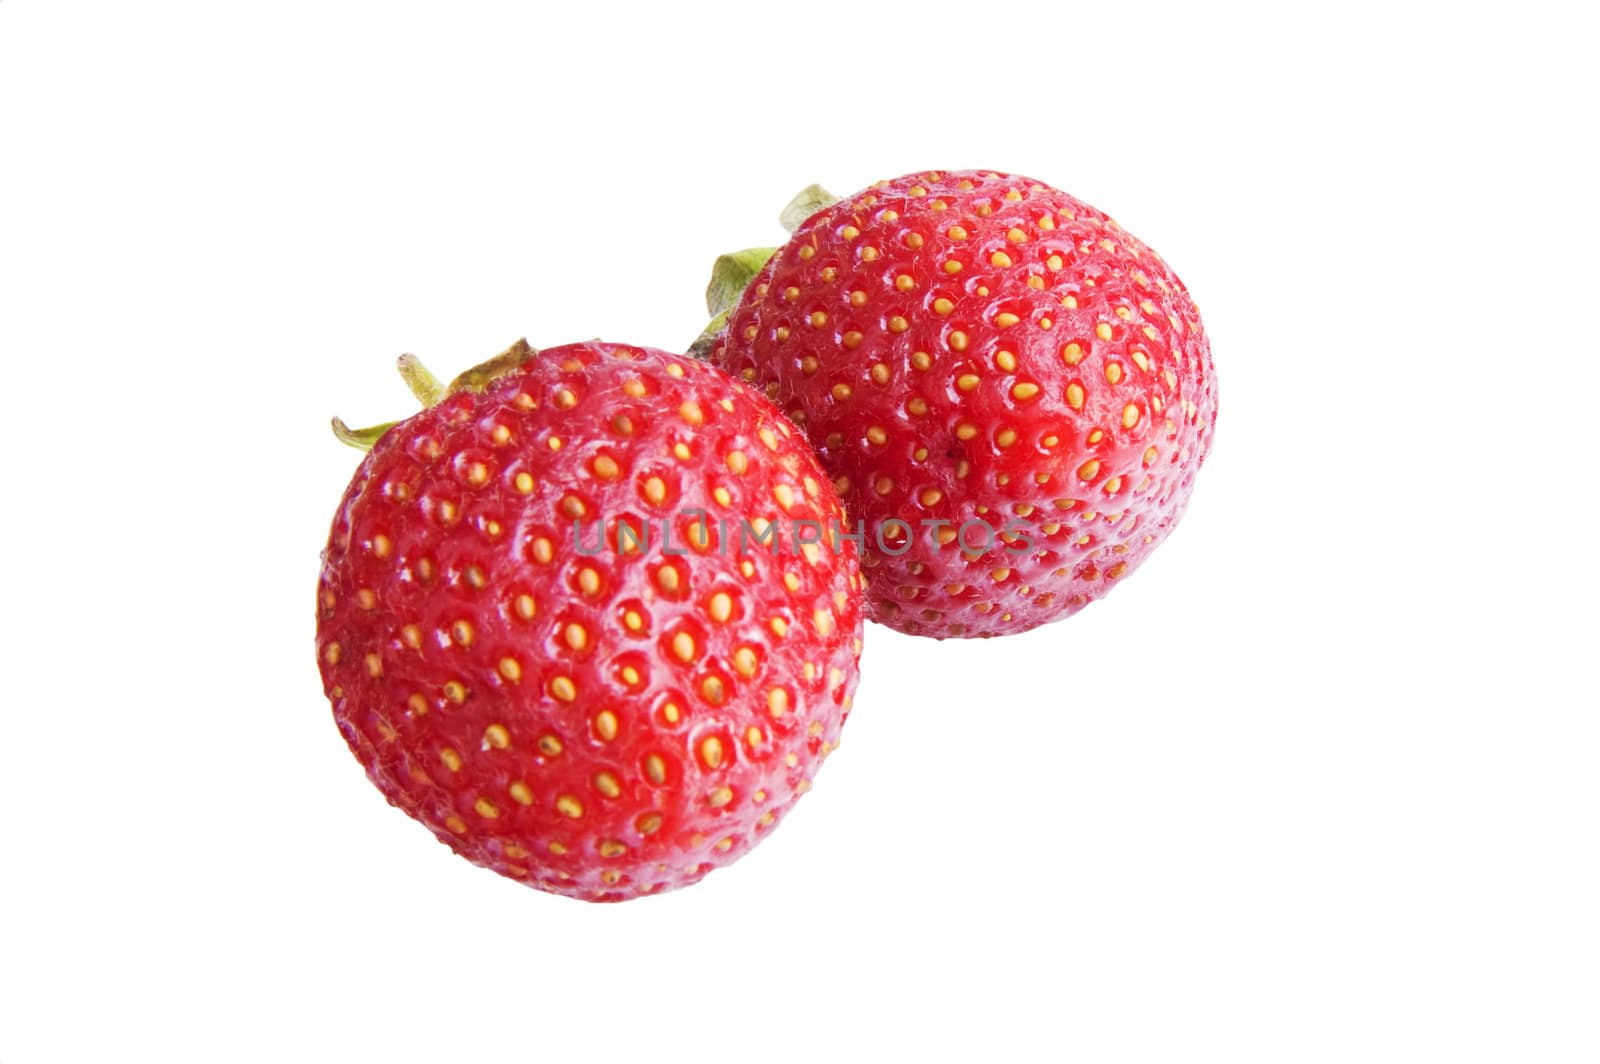 A Photo of a Couple of Isolated Strawberrys